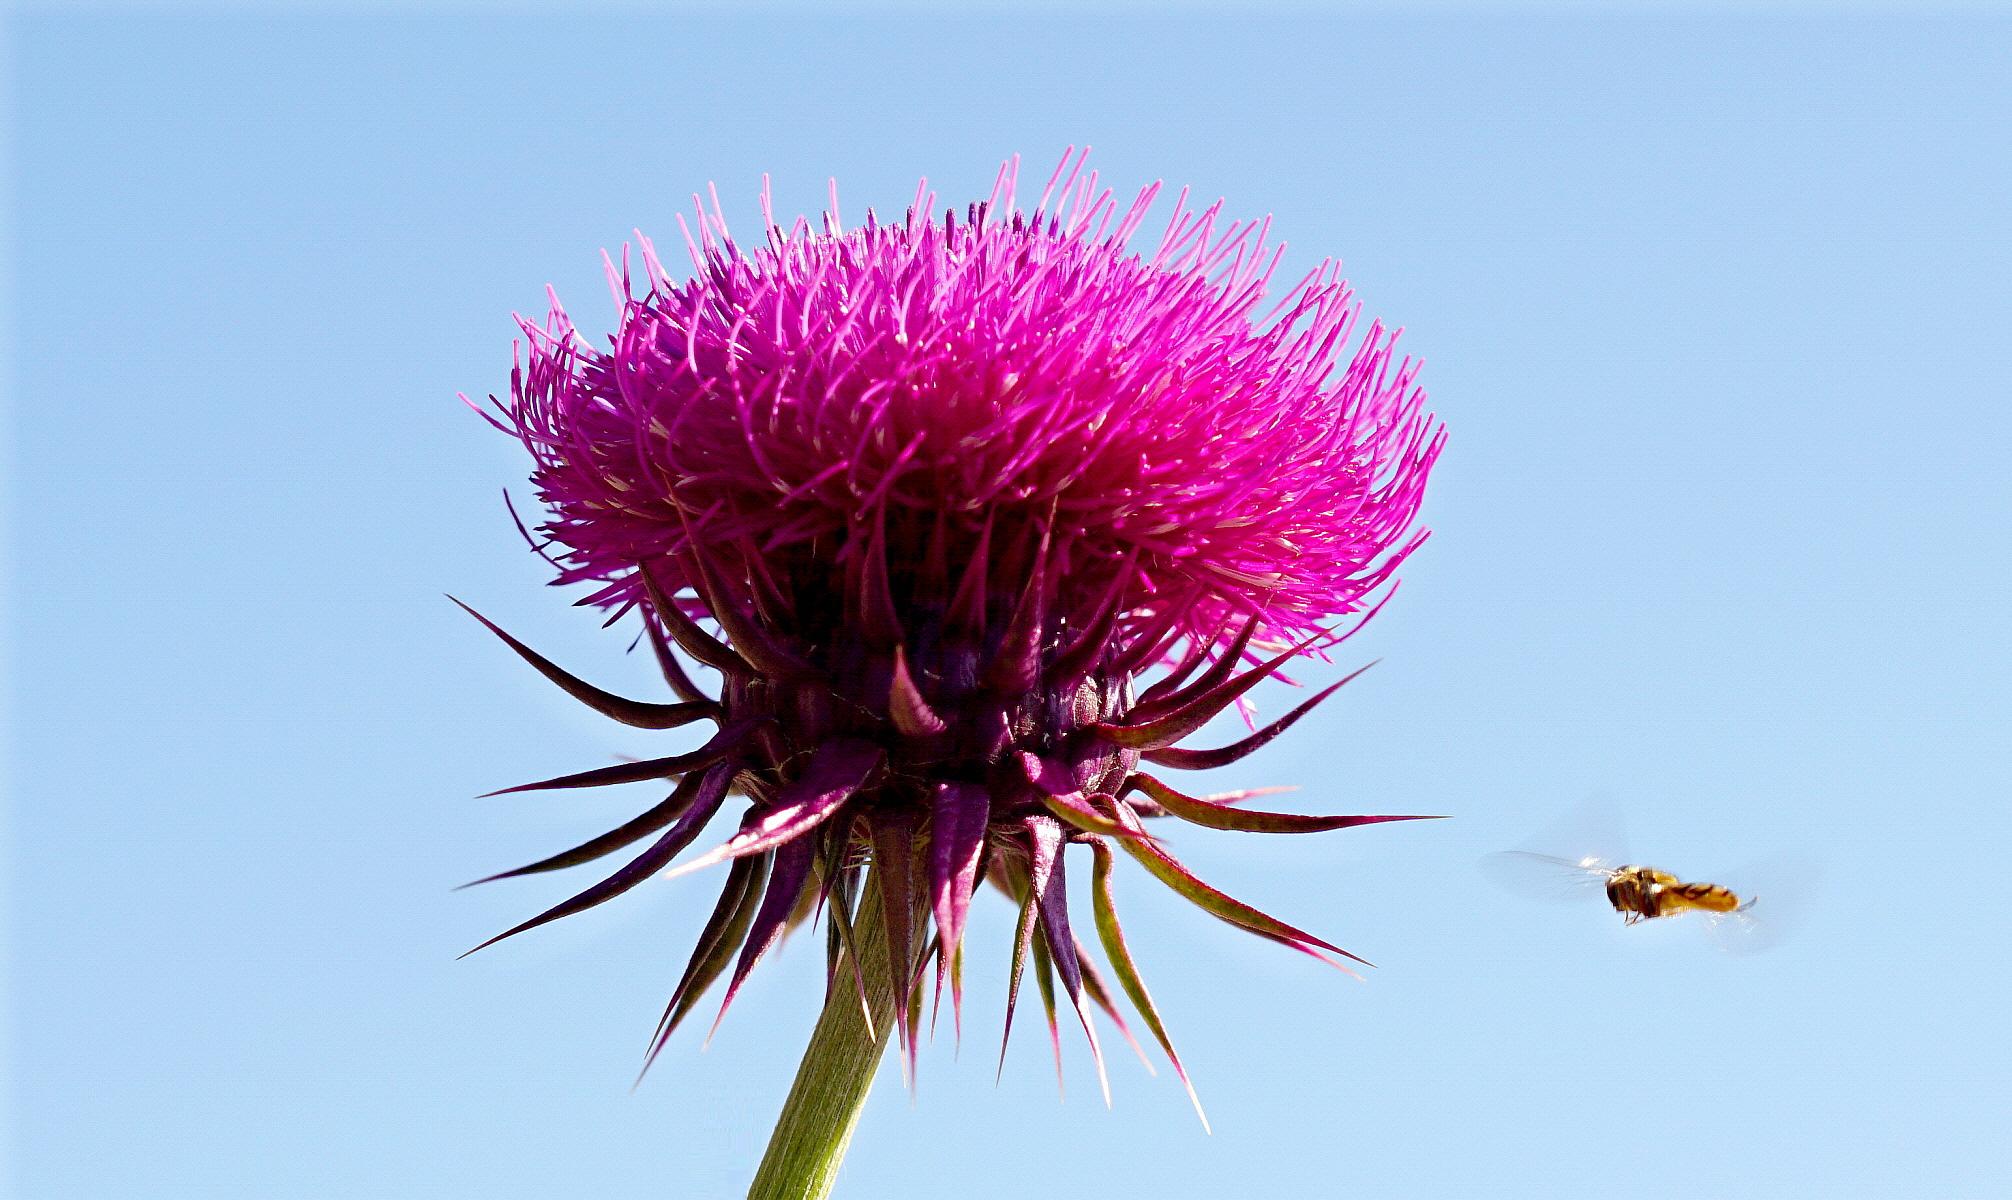 The thistle and the bee!...